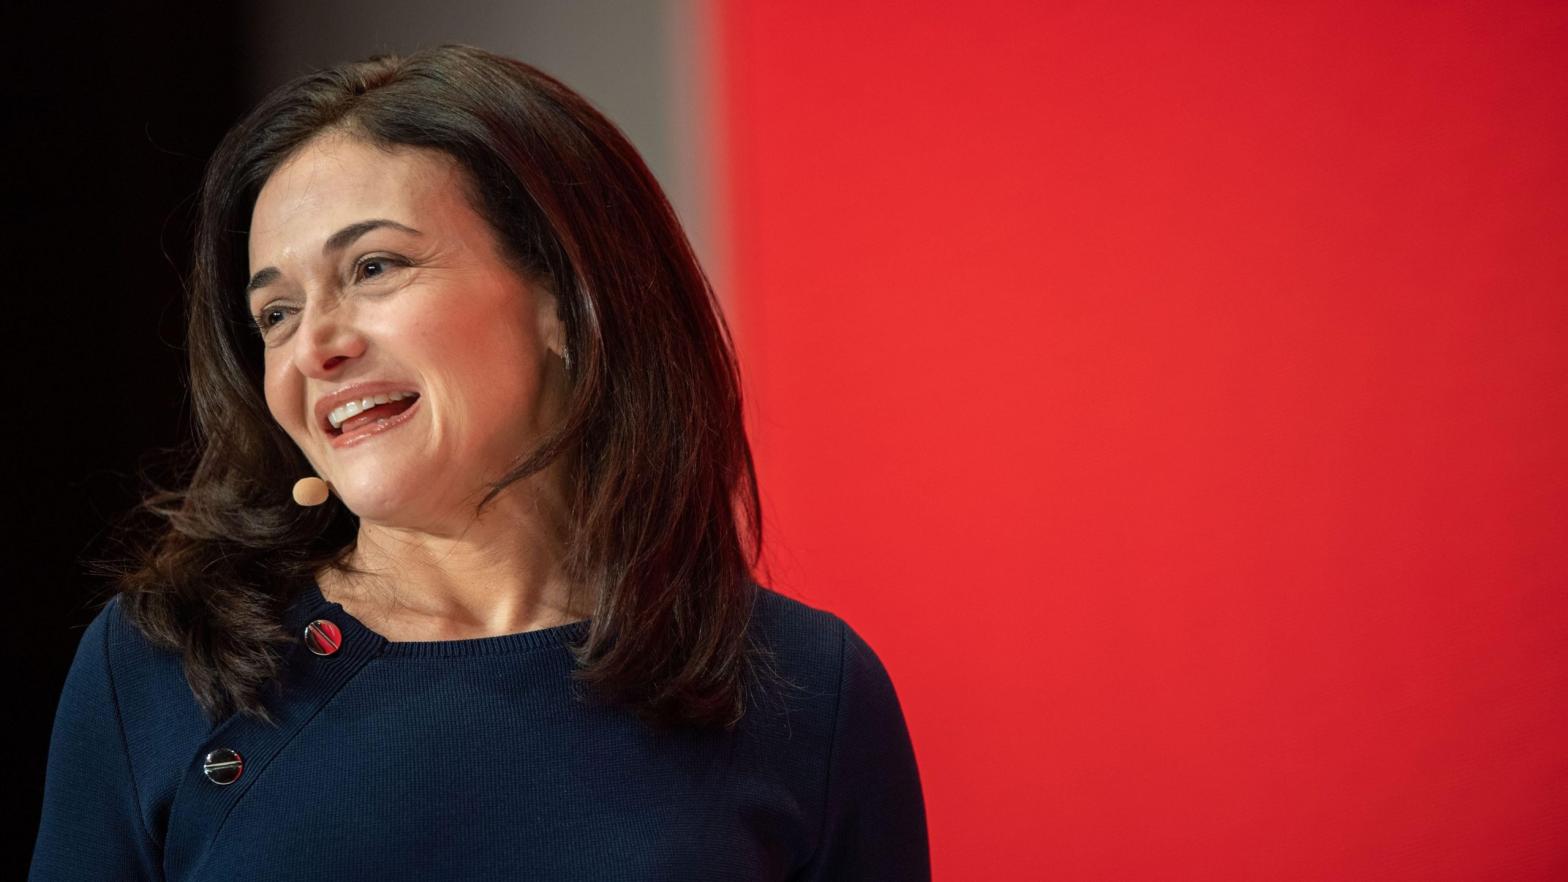 Sheryl Sandberg, chief operating officer of Instagram's parent company Facebook, speaks during the Digital-Life-Design conference in 2019. (Photo: Lino Mirgeler, Getty Images)